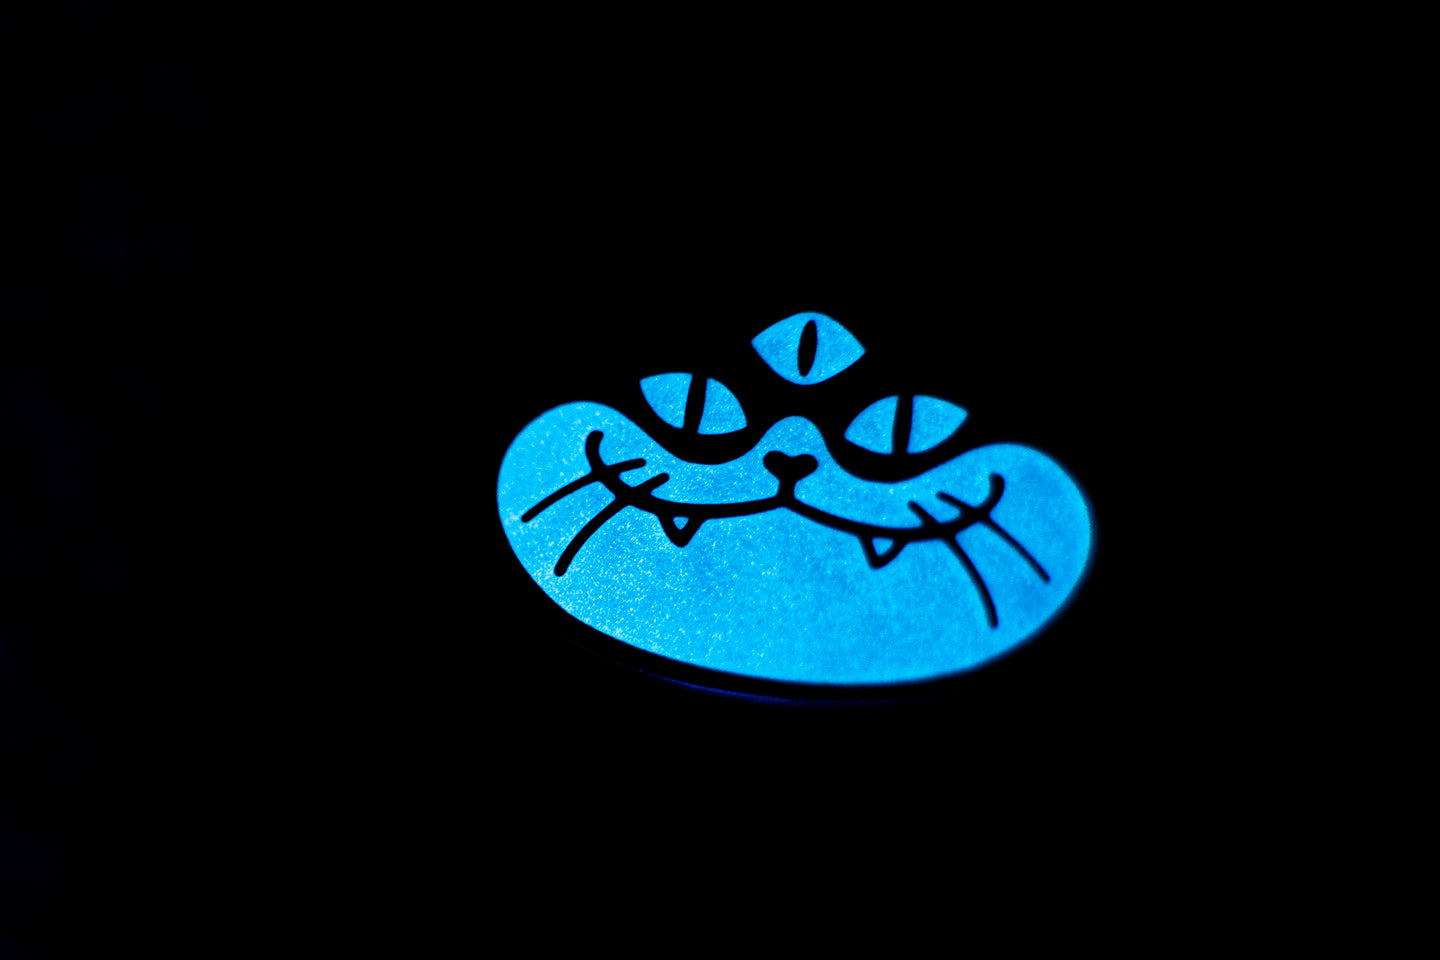 'Three-Eyed Cat' Glow-in-the-Dark Pin by Stacey Robson